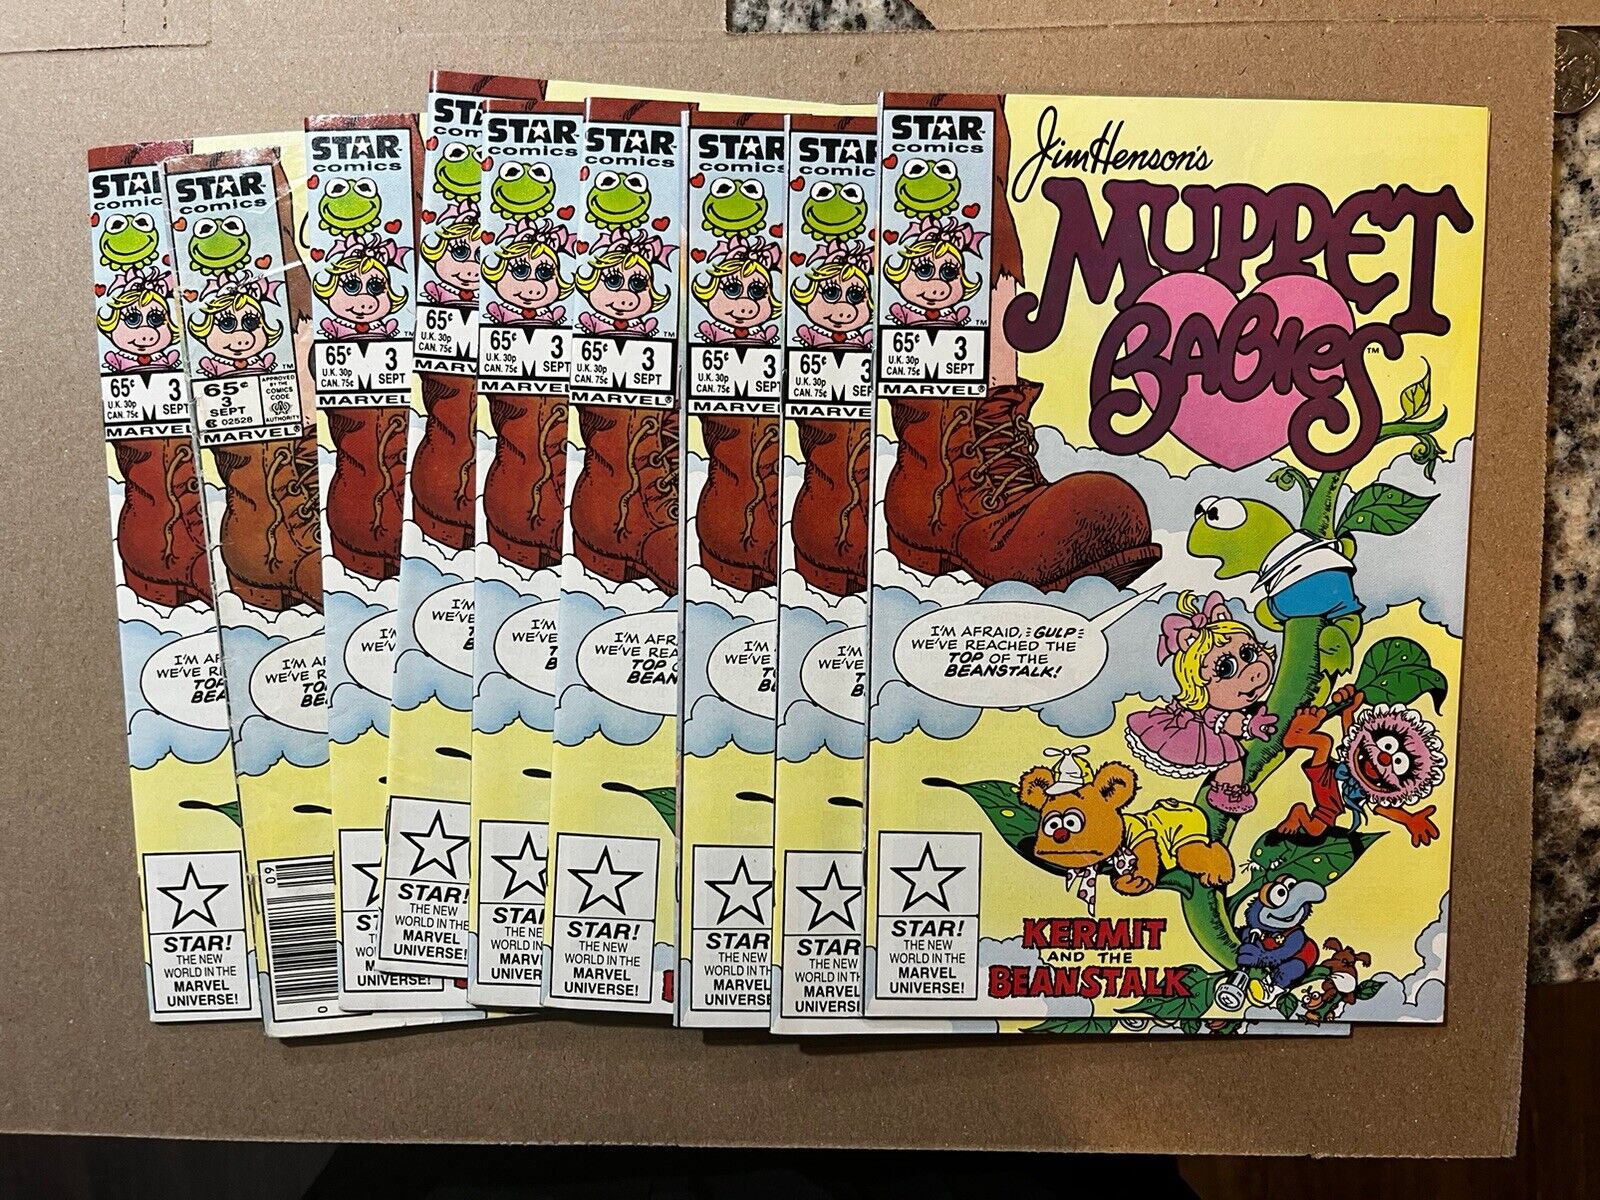 1985 MARVEL STAR COMICS MUPPET BABIES #3 9x Copies From Vg - Vf/nm. Most Are Vf